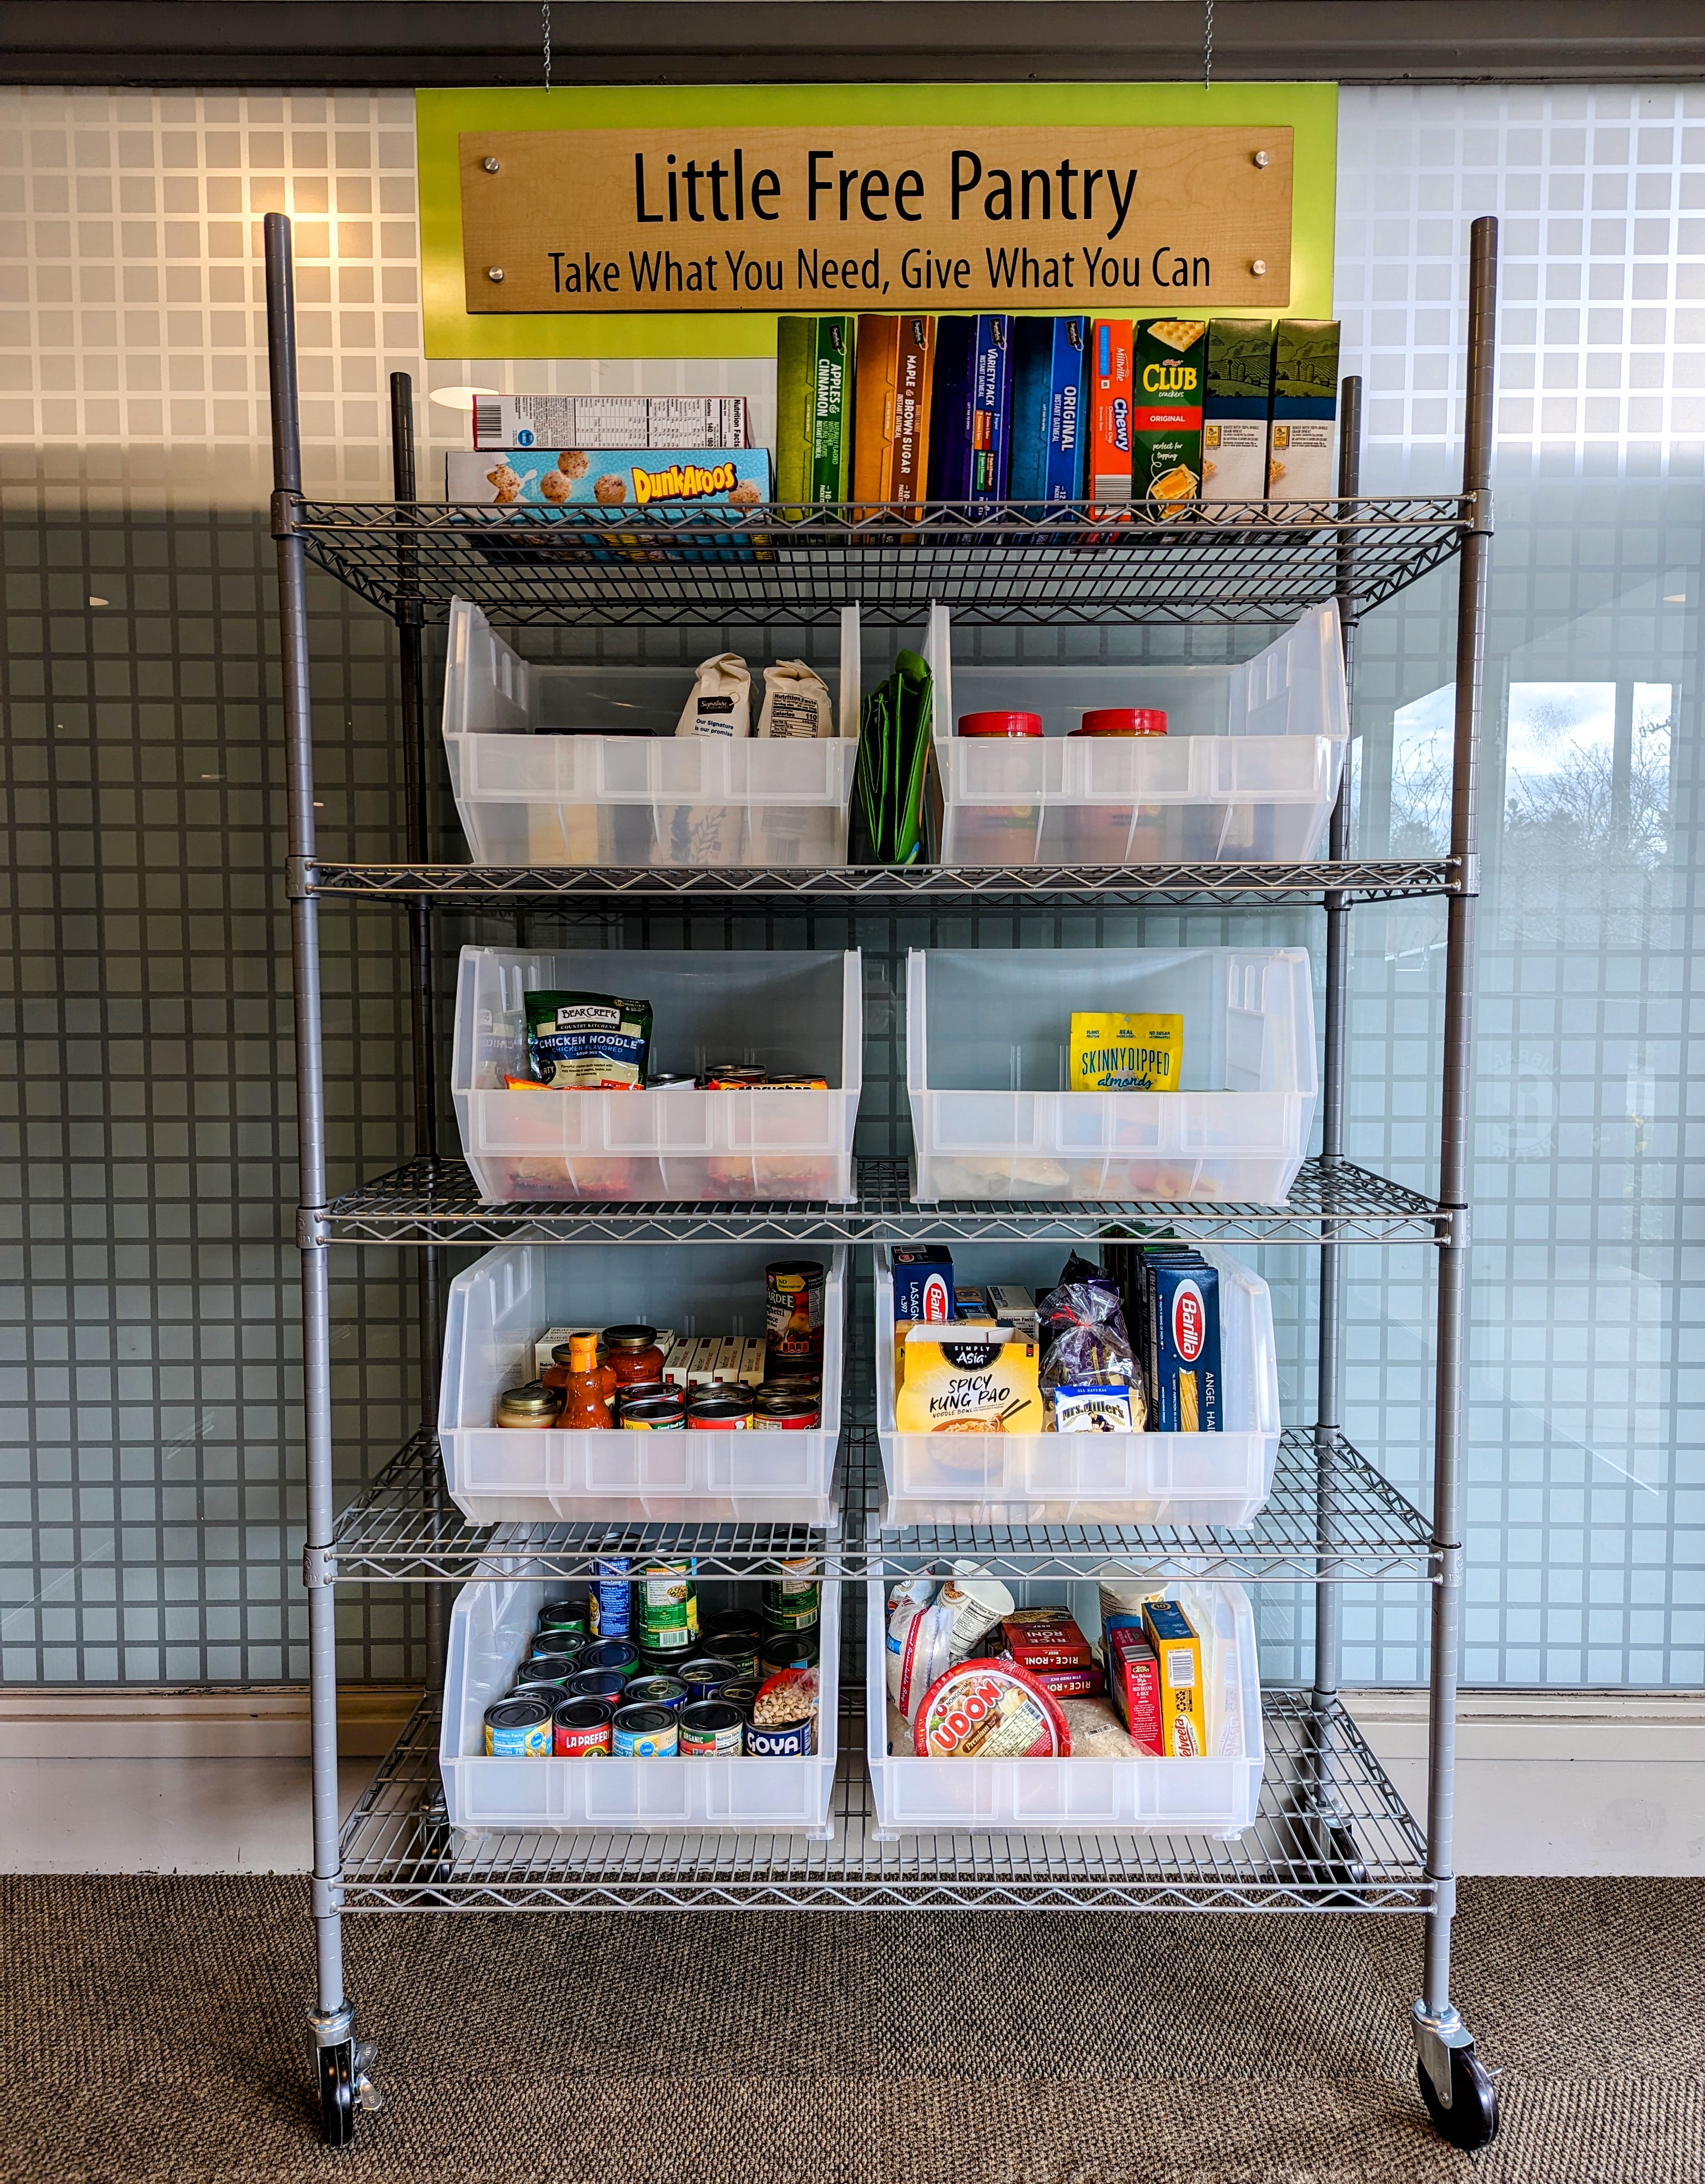 Dundee Library: Little Free Pantry Photo 1